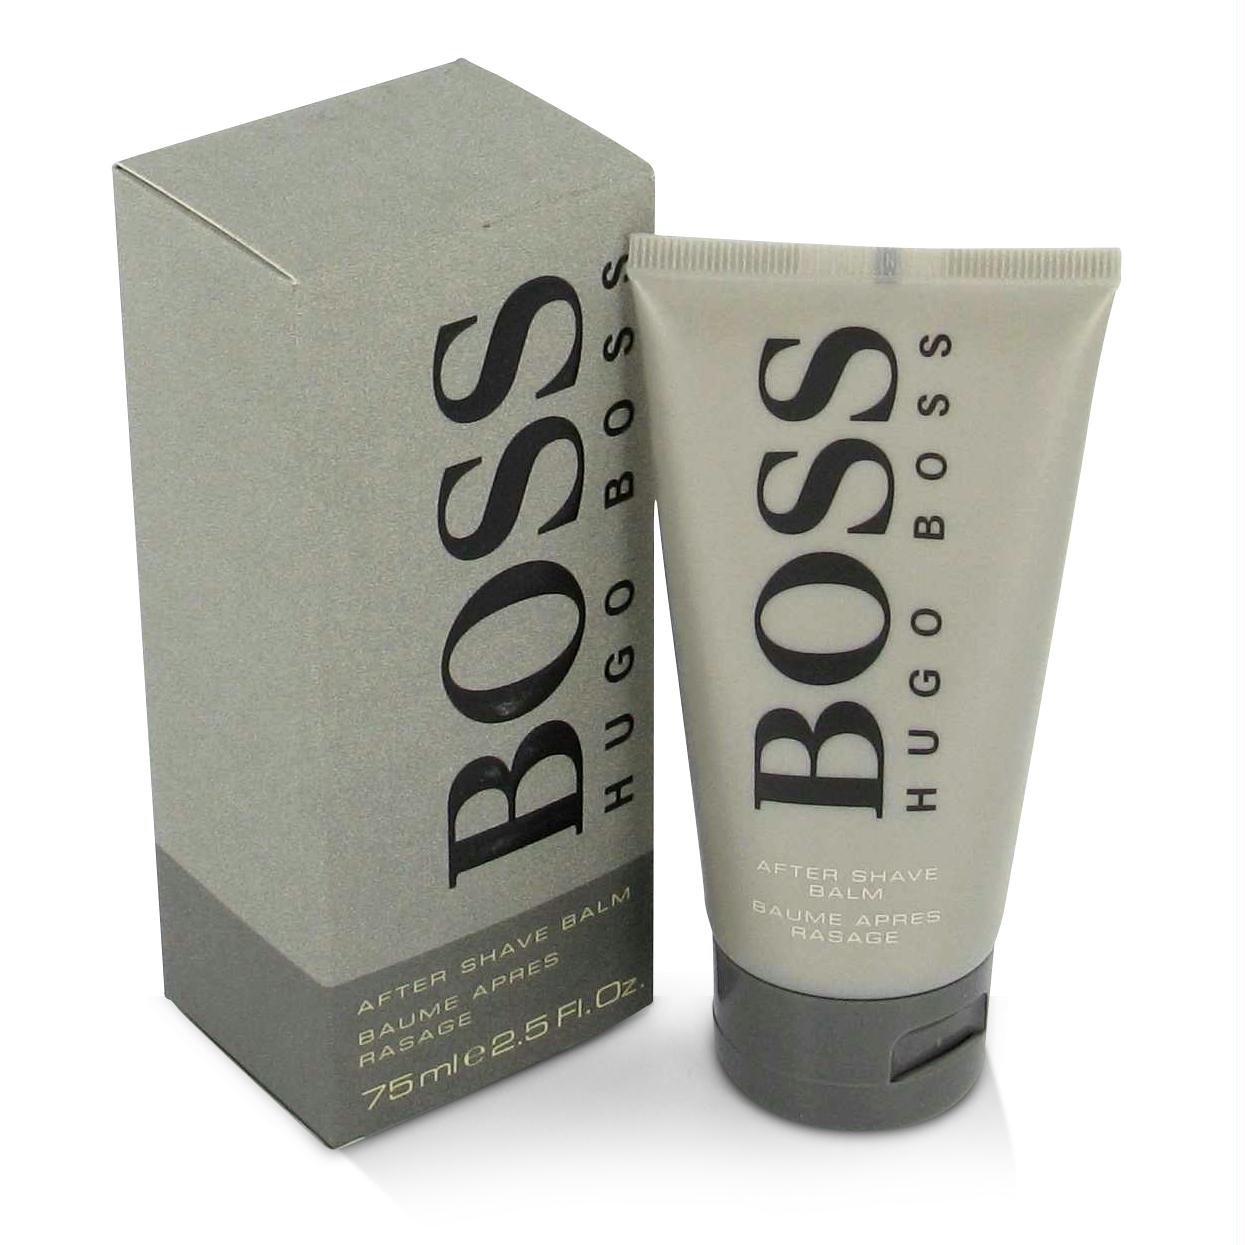 Boss No. 6 By After Shave Balm 2.5 Oz